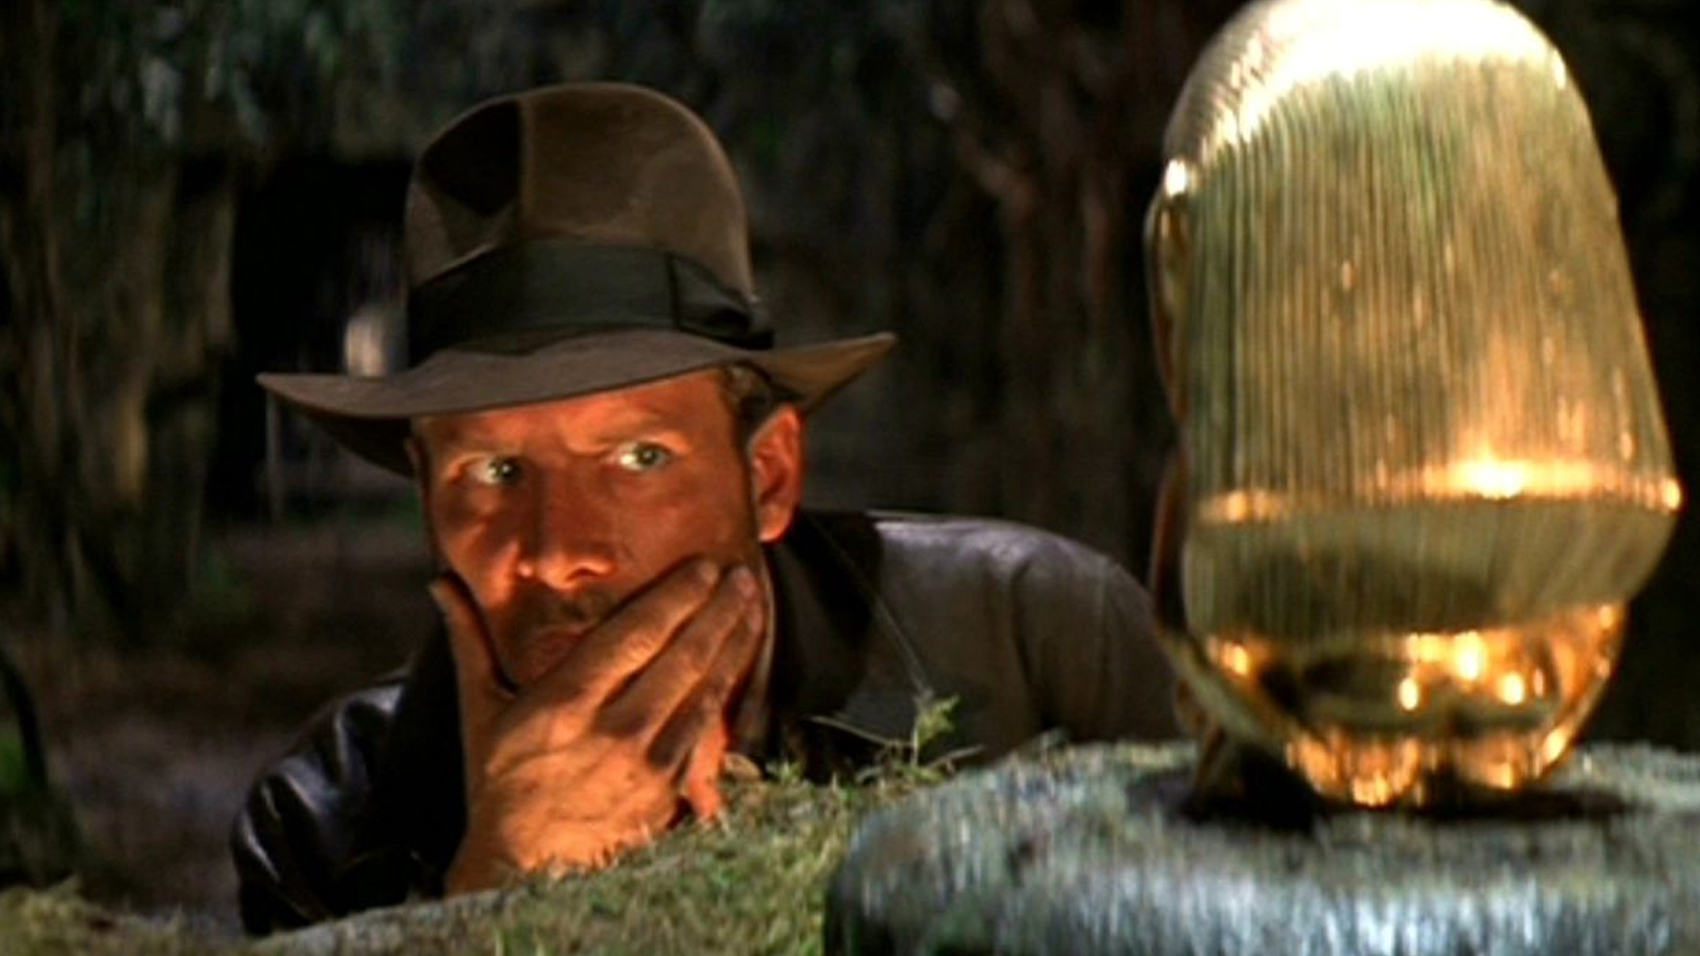 Indiana Jones All Movies From Indiana Jones Collection Saga Are On